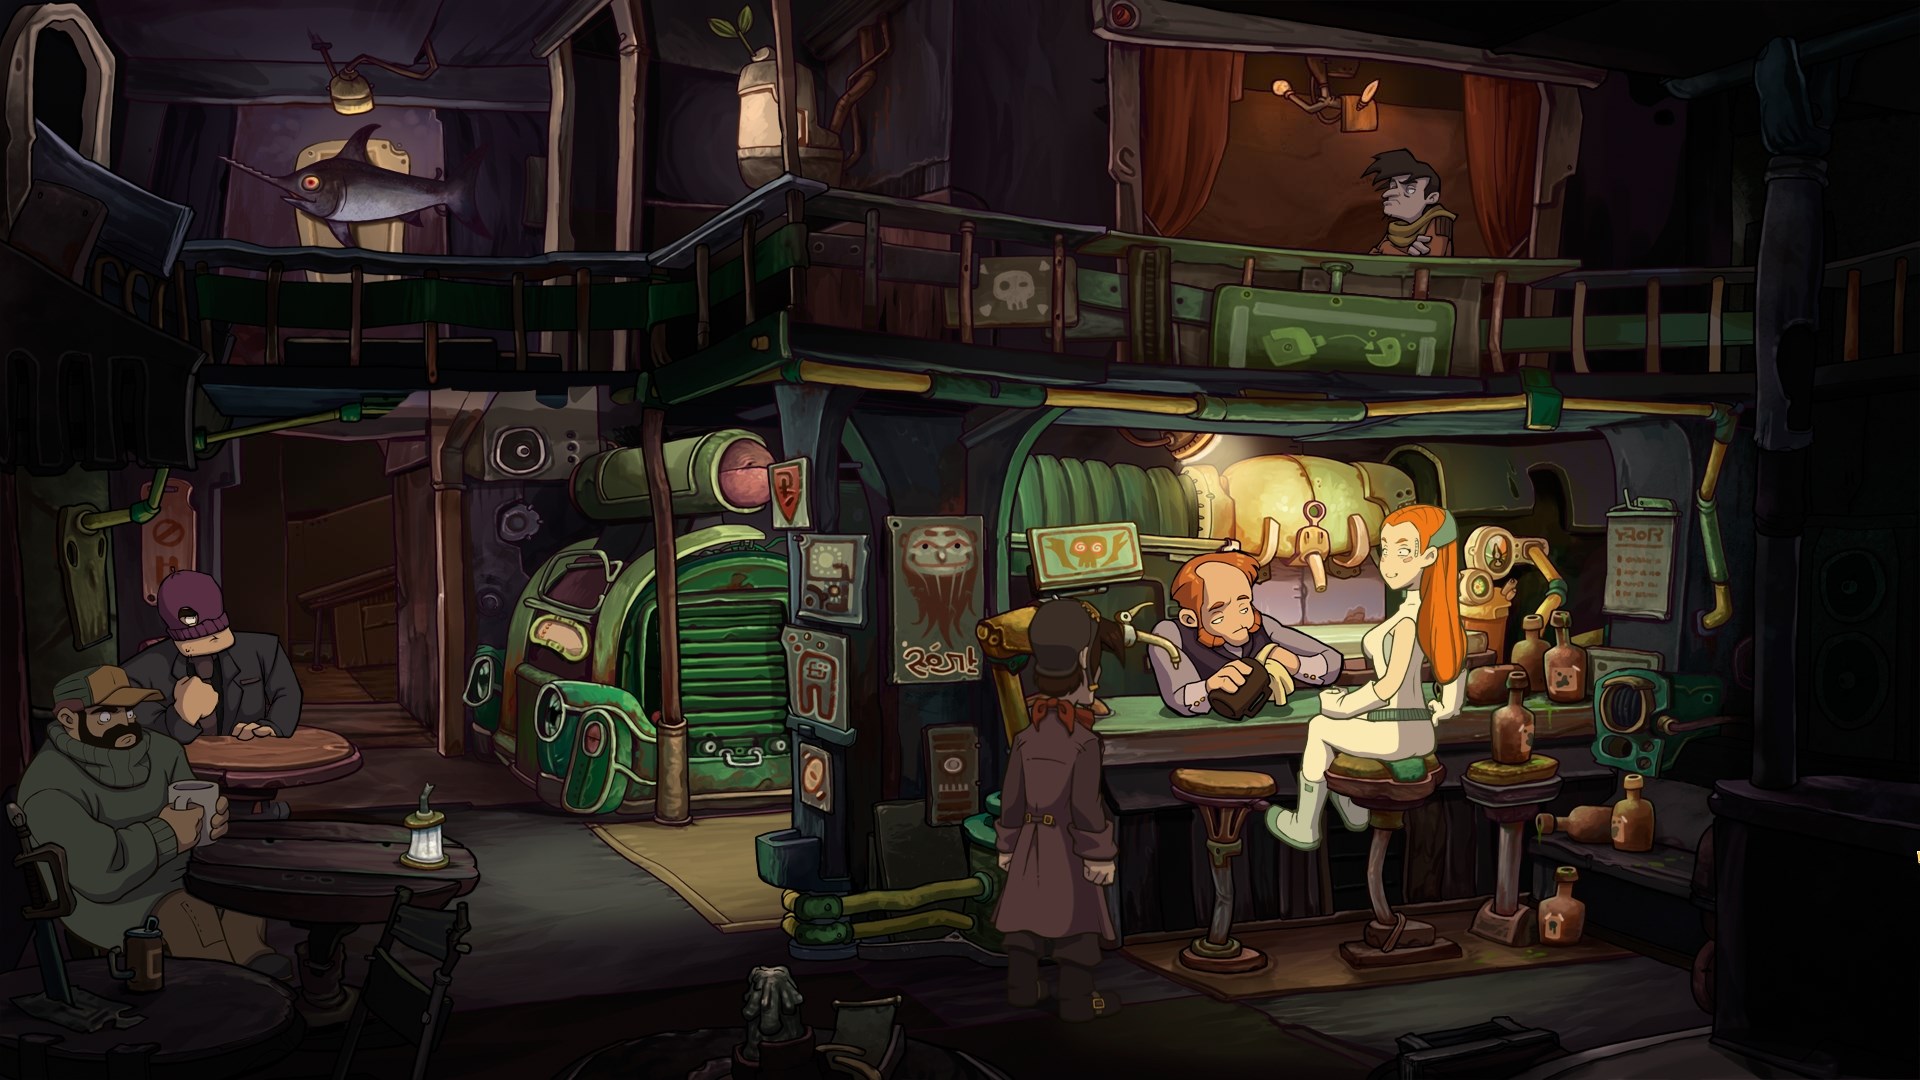 Deponia Full Scrap Collection Steam CD Key